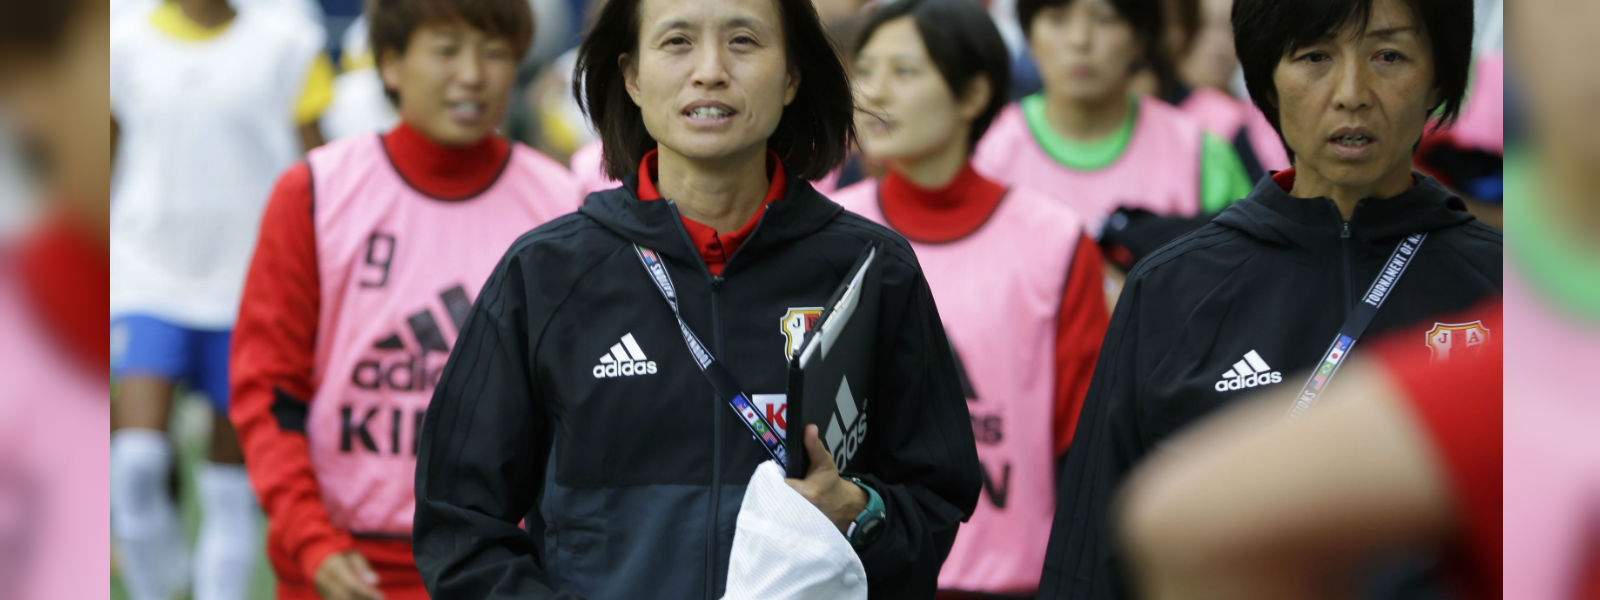 Japan hoping to peak at France World Cup